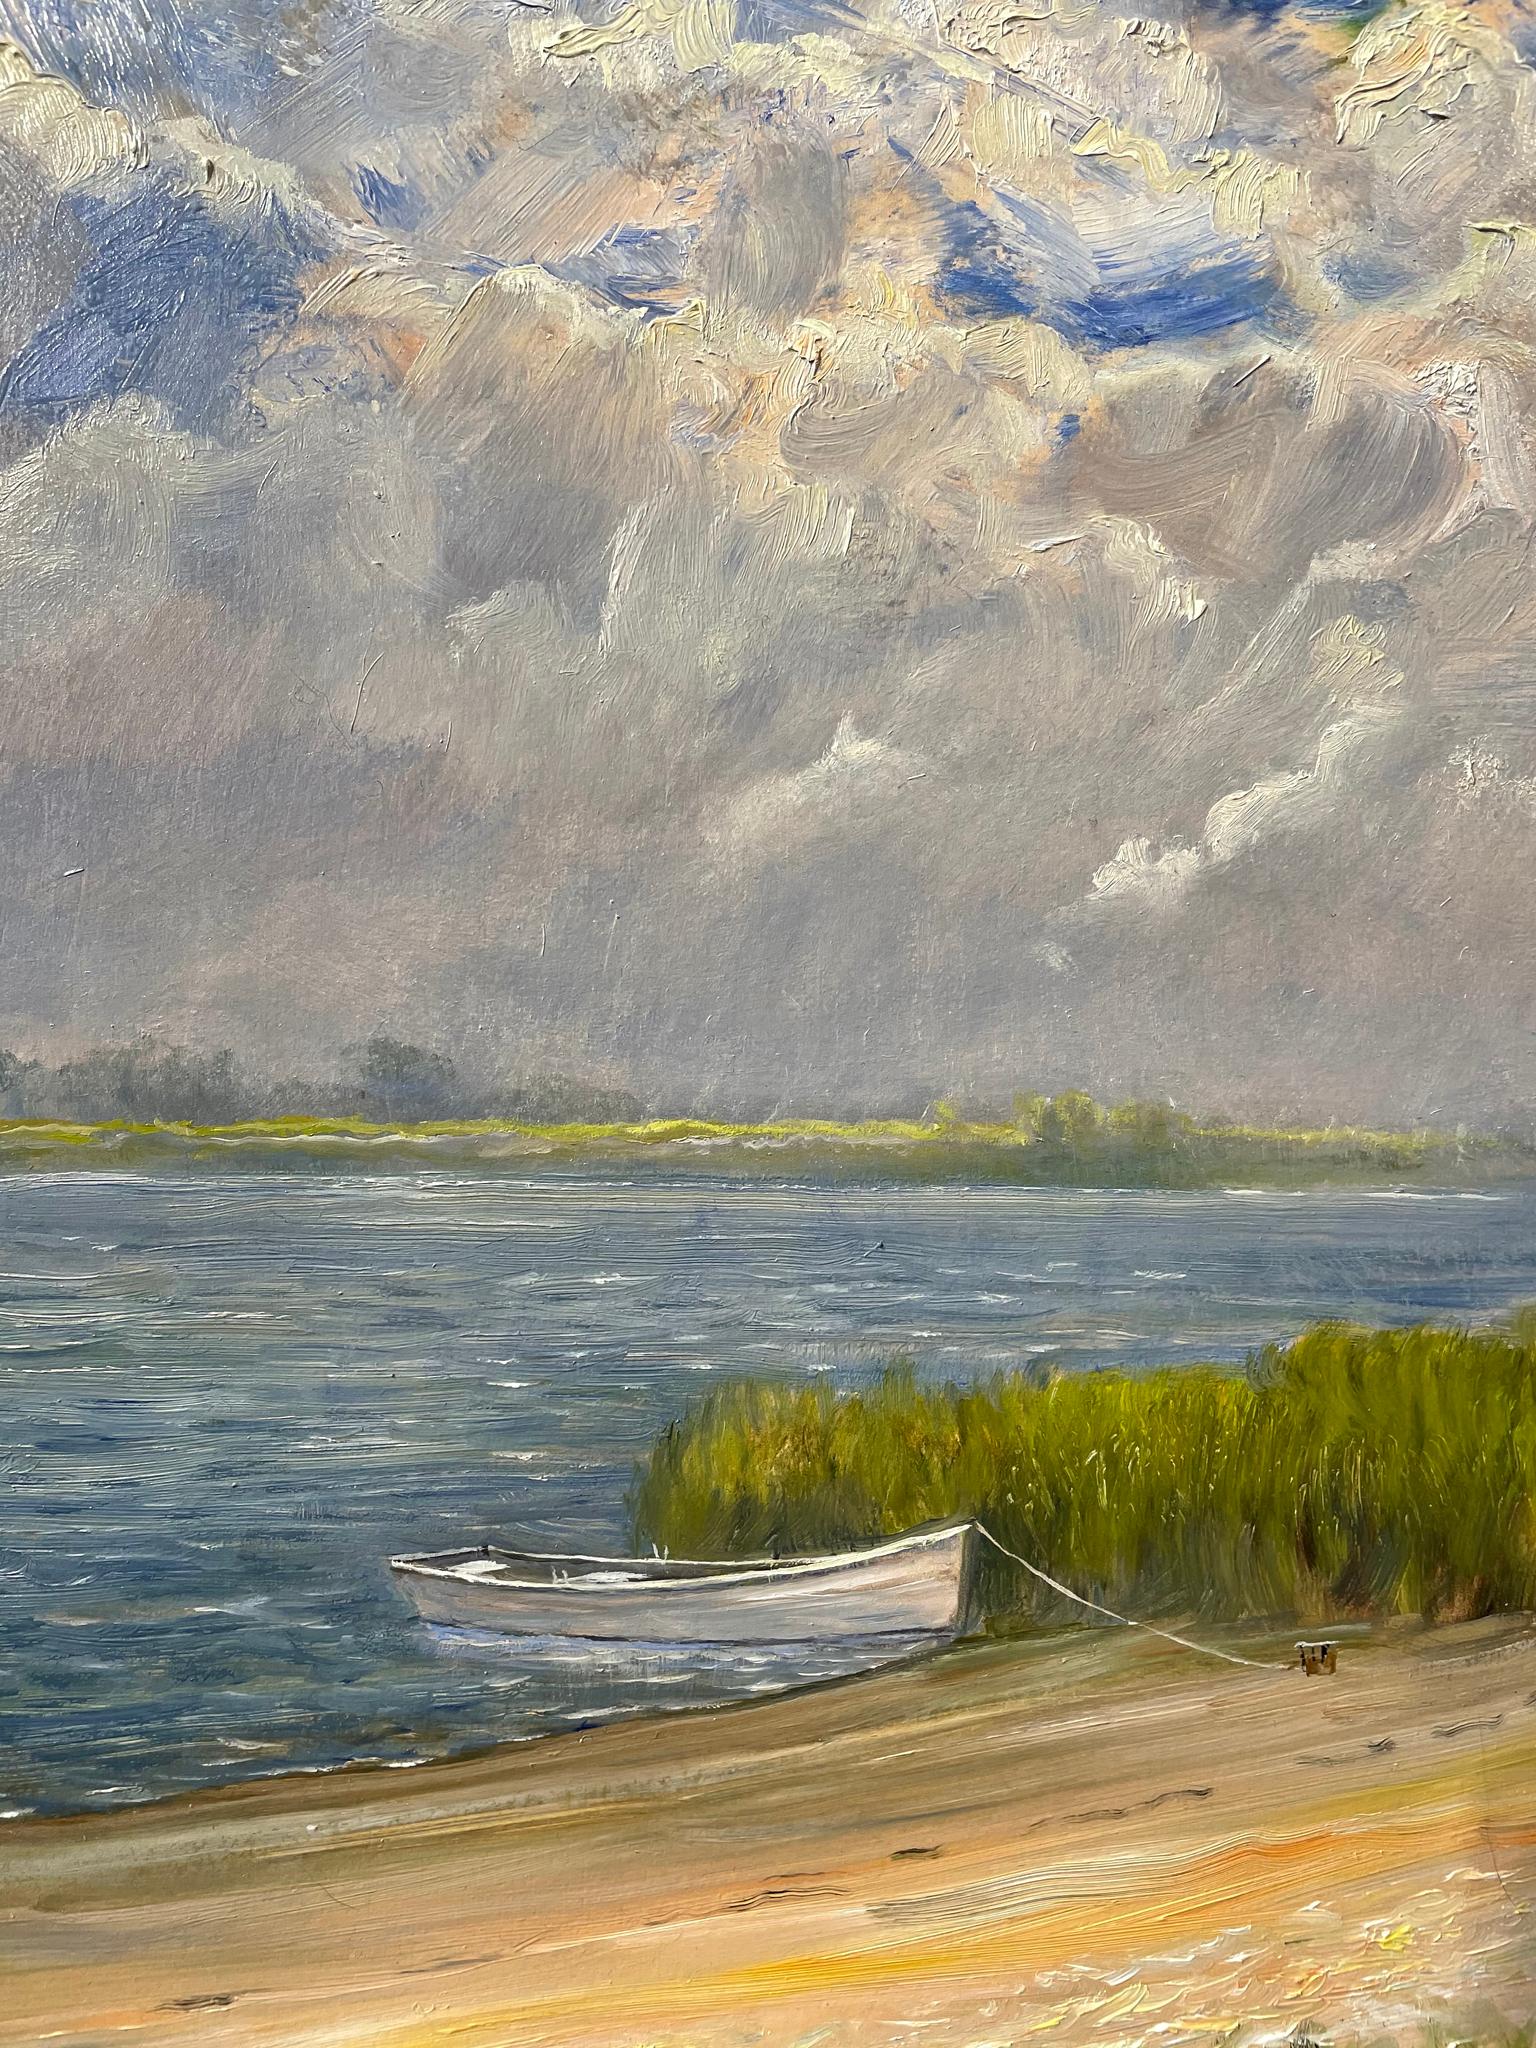 White Boat on Long Island New York - Painting by Nicholas Oberling